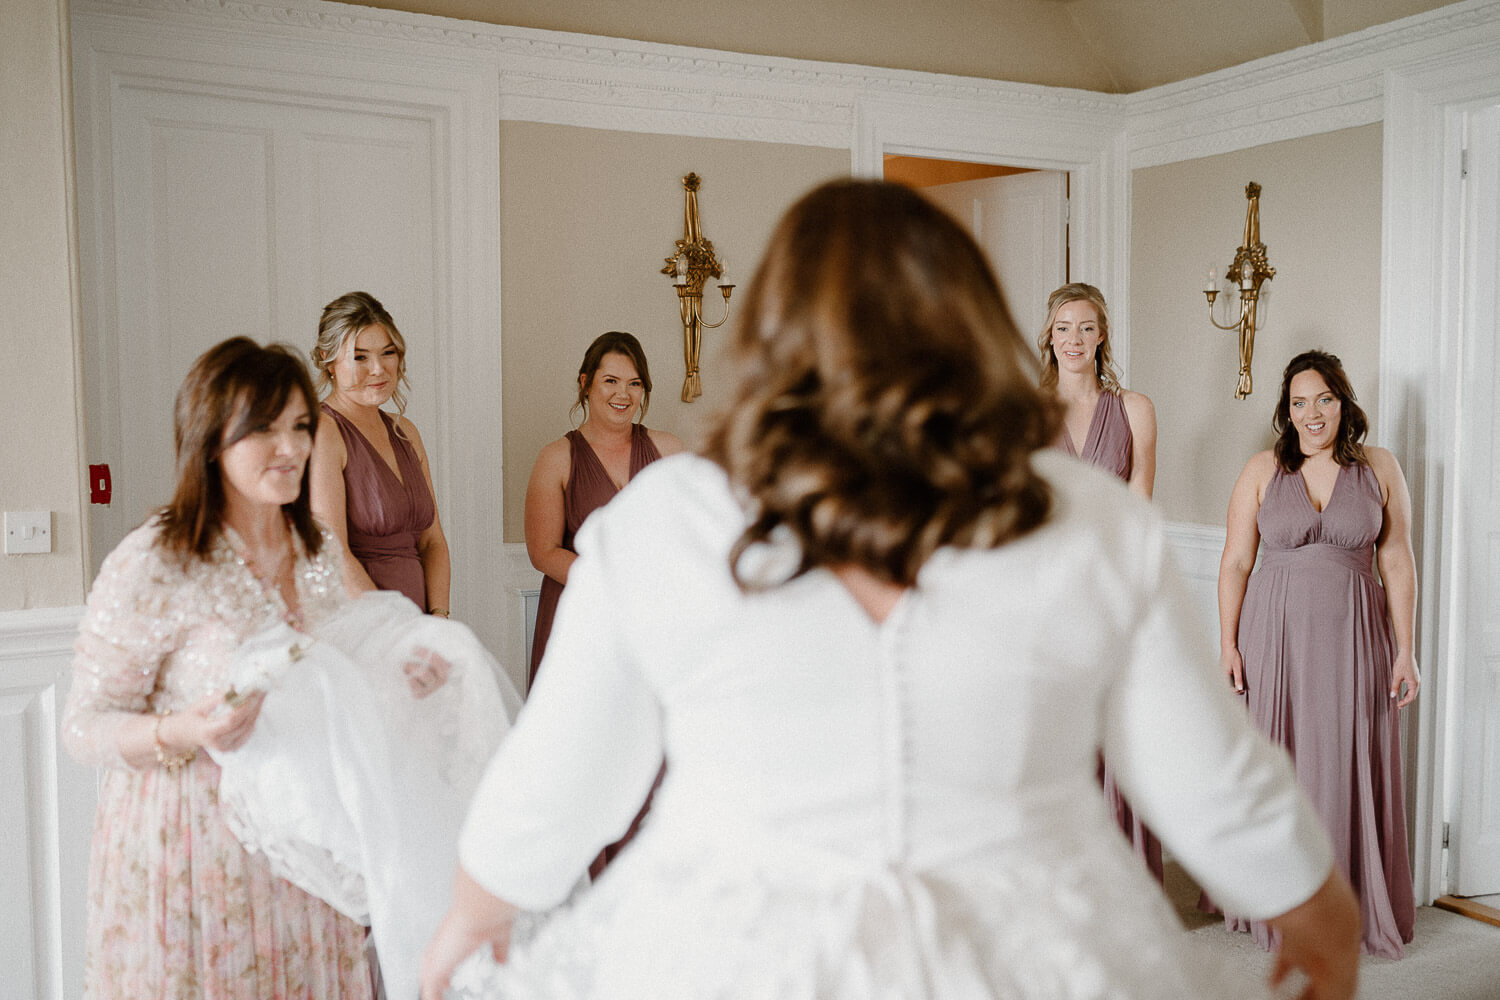 Bridesmaids get their first look of bride Emily at Kingston Estate.